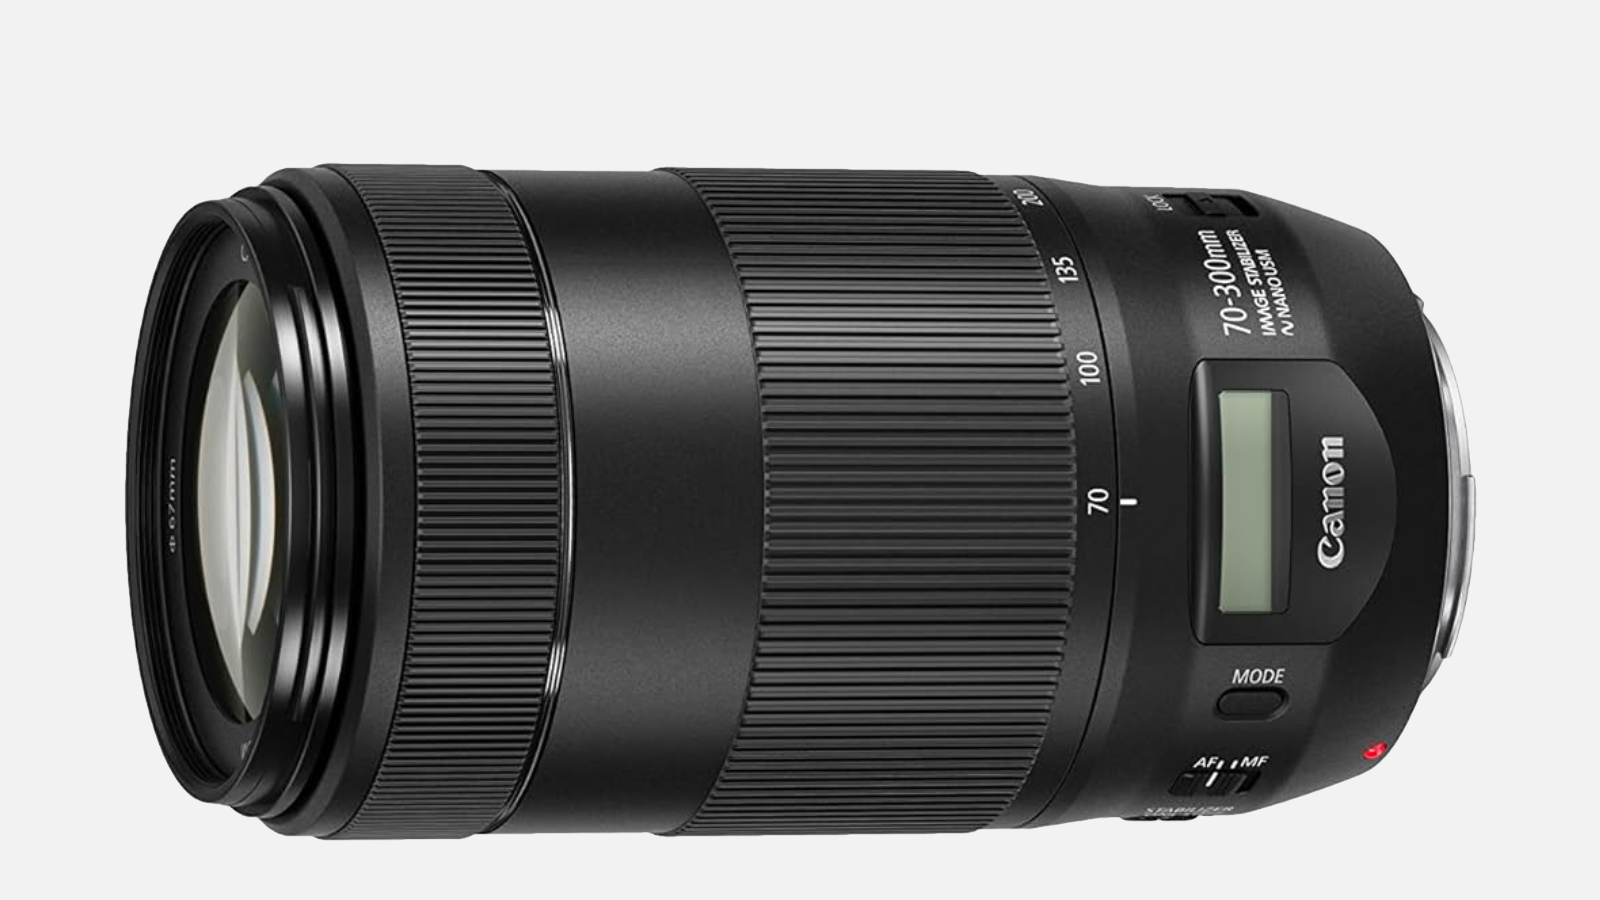 Canon EF 70-300mm f/4-5.6 IS II USM telephoto zoom lens on a plain background